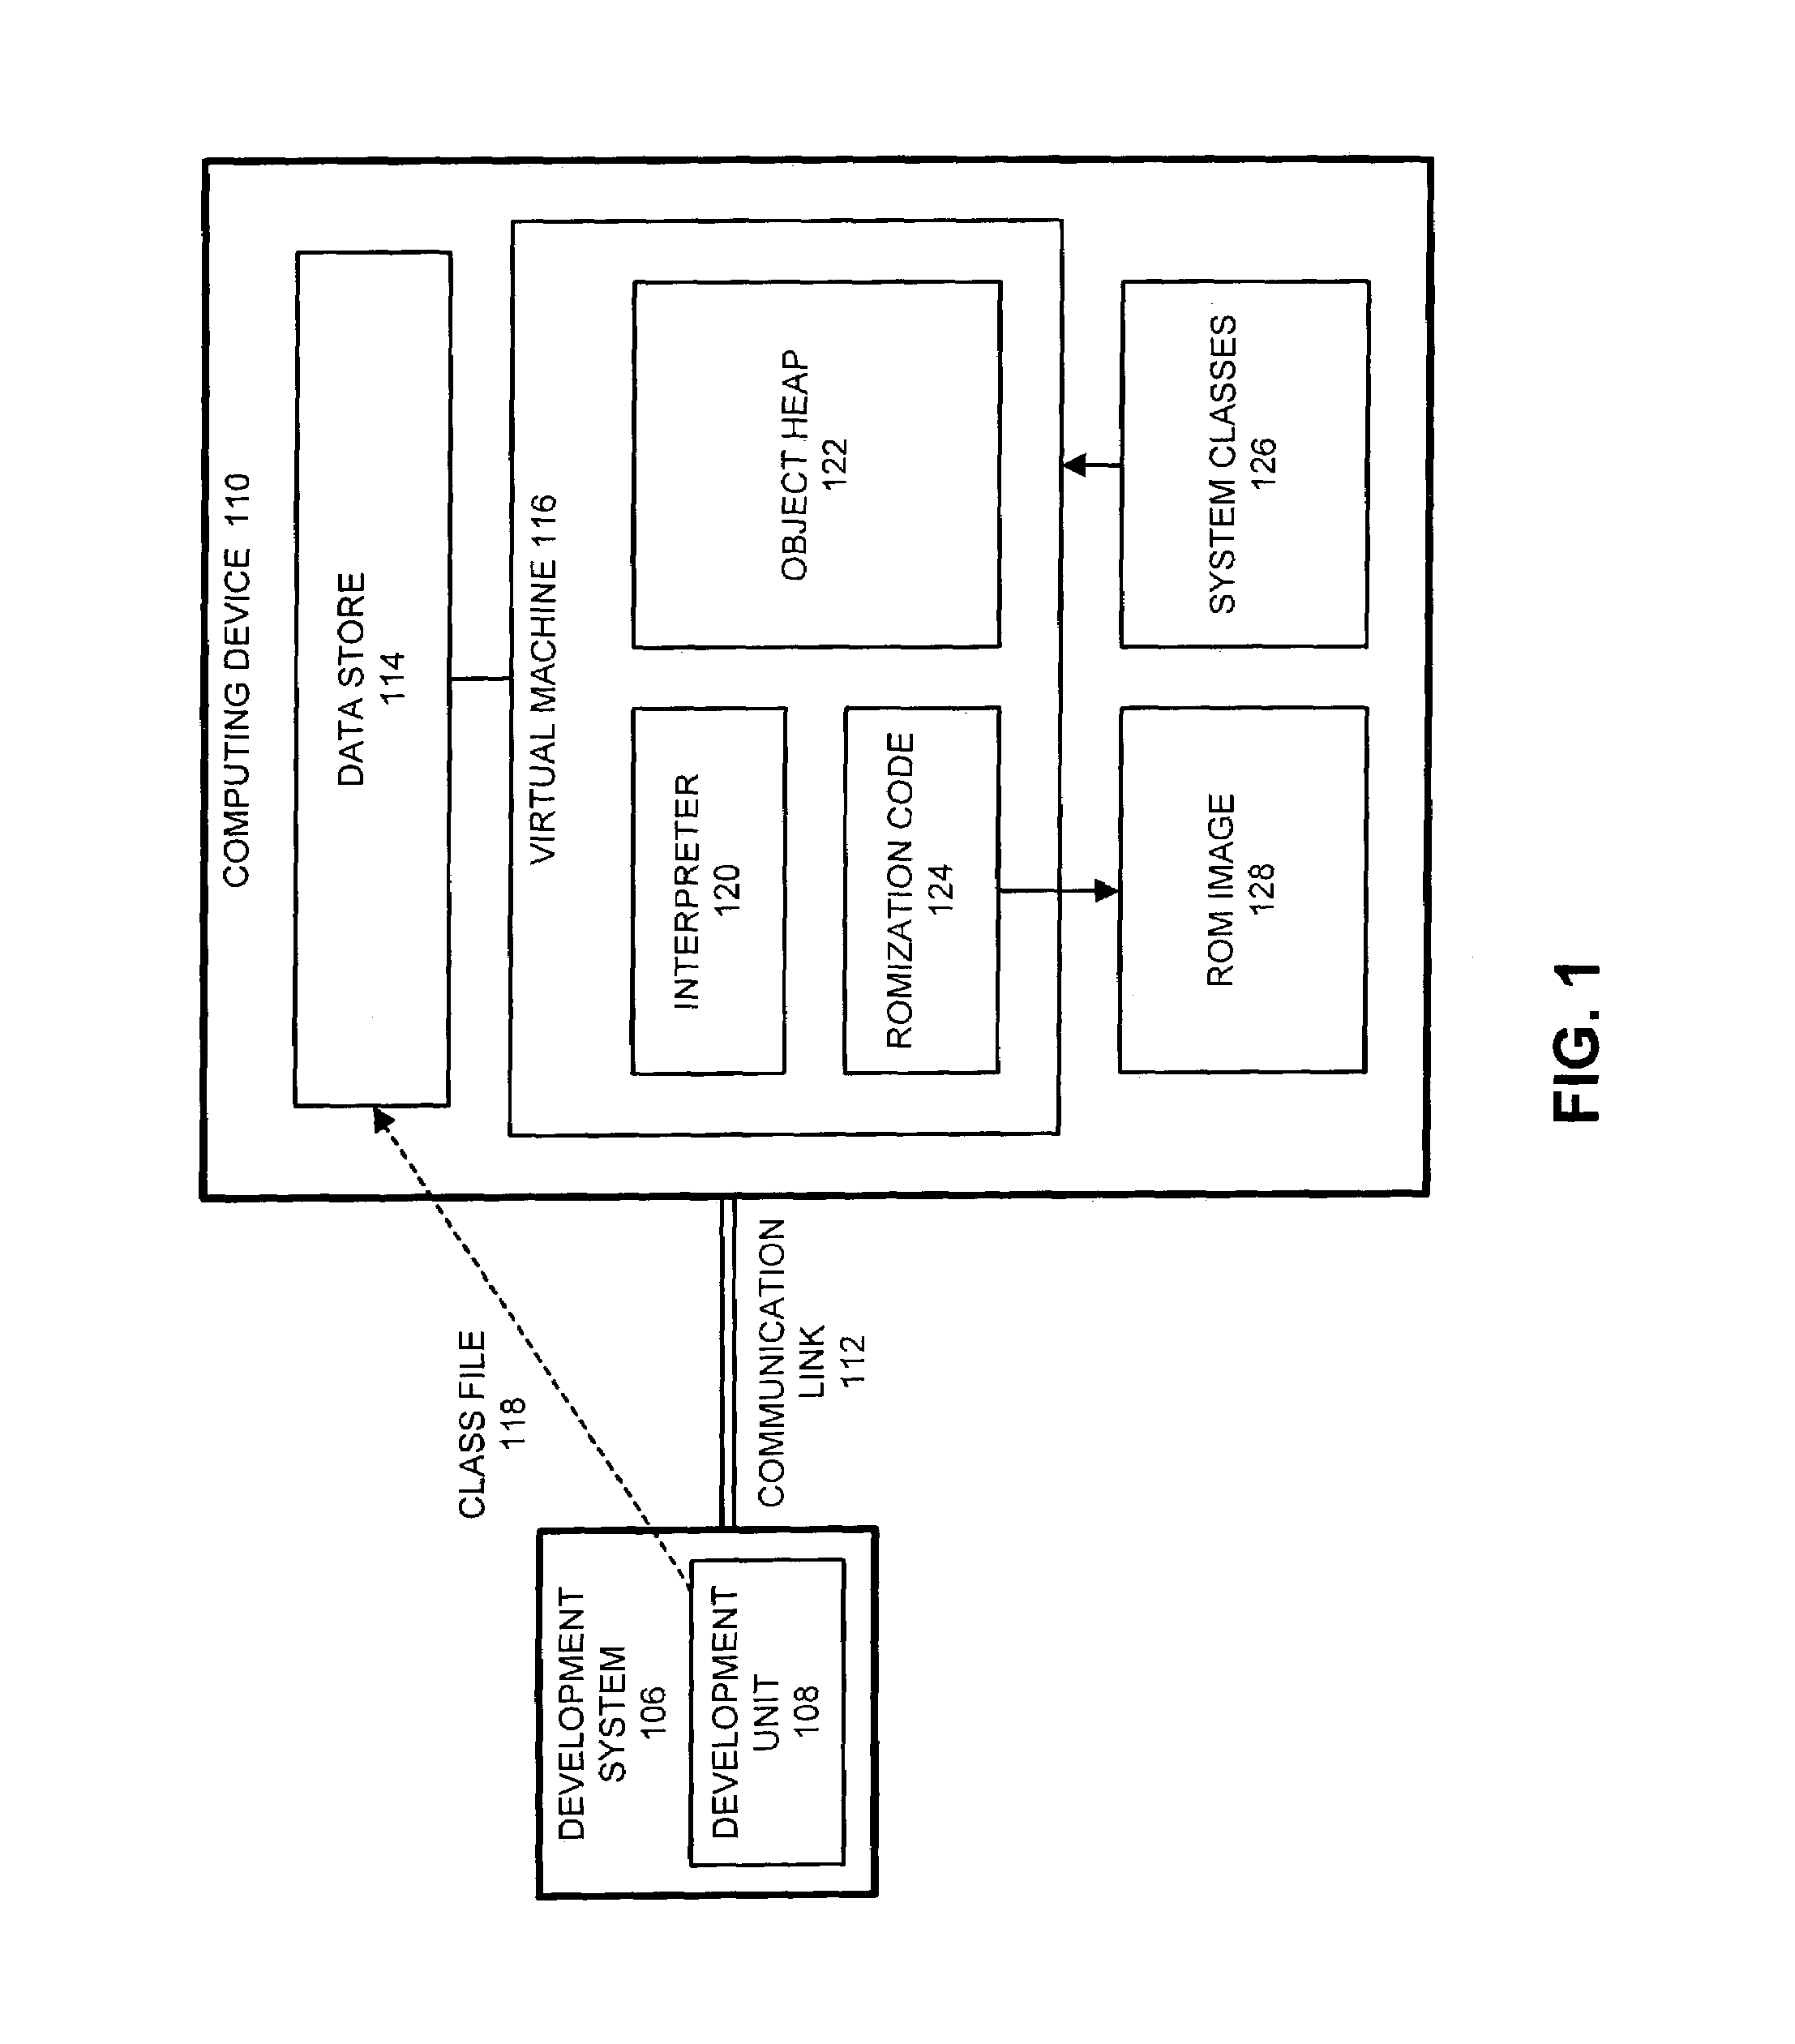 Method and apparatus for initializing romized system classes at virtual machine build time